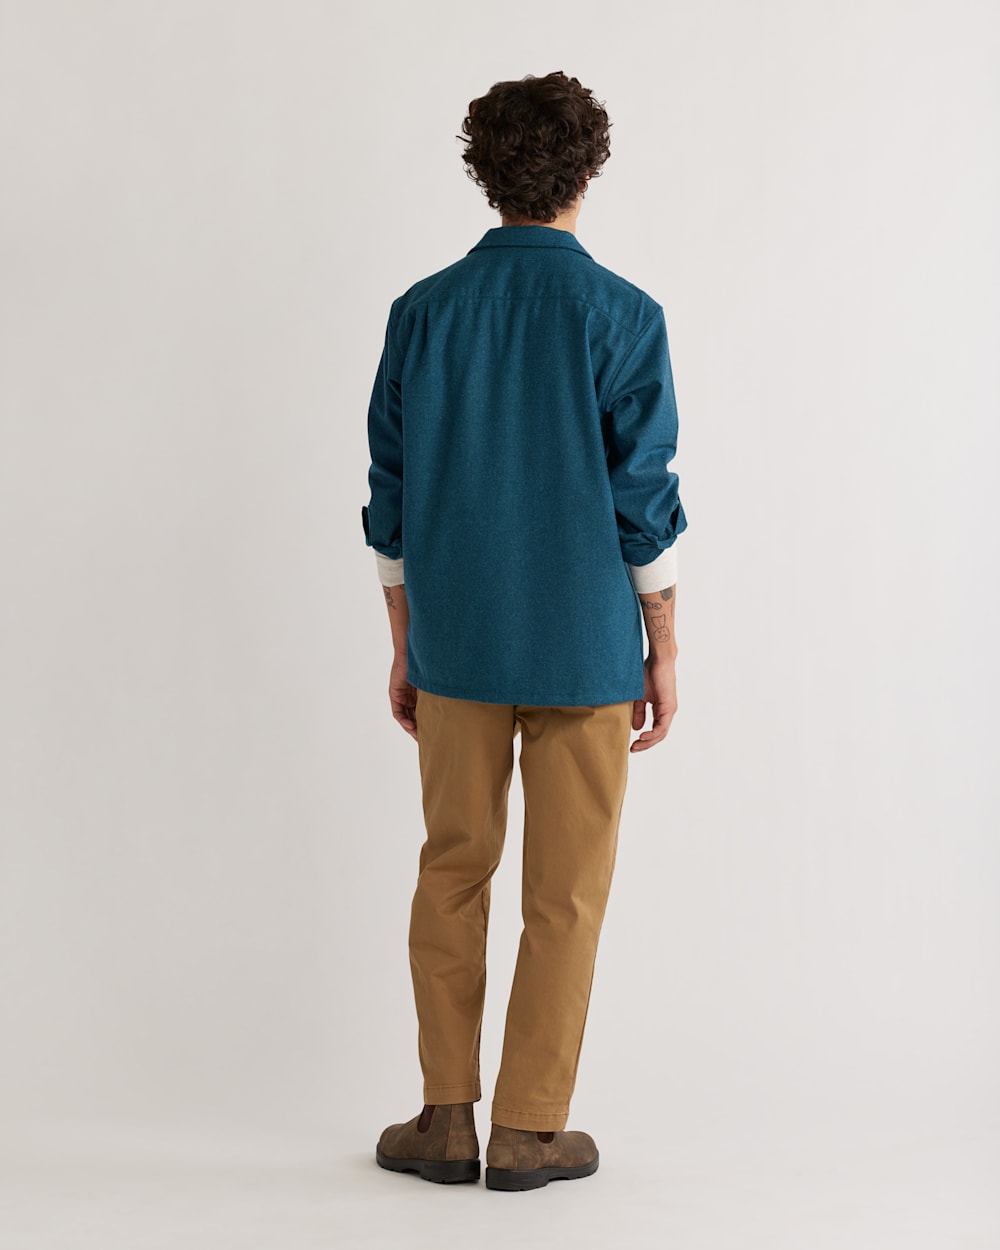 ALTERNATE VIEW OF MEN'S BOARD SHIRT IN BLUE MIX SOLID image number 3